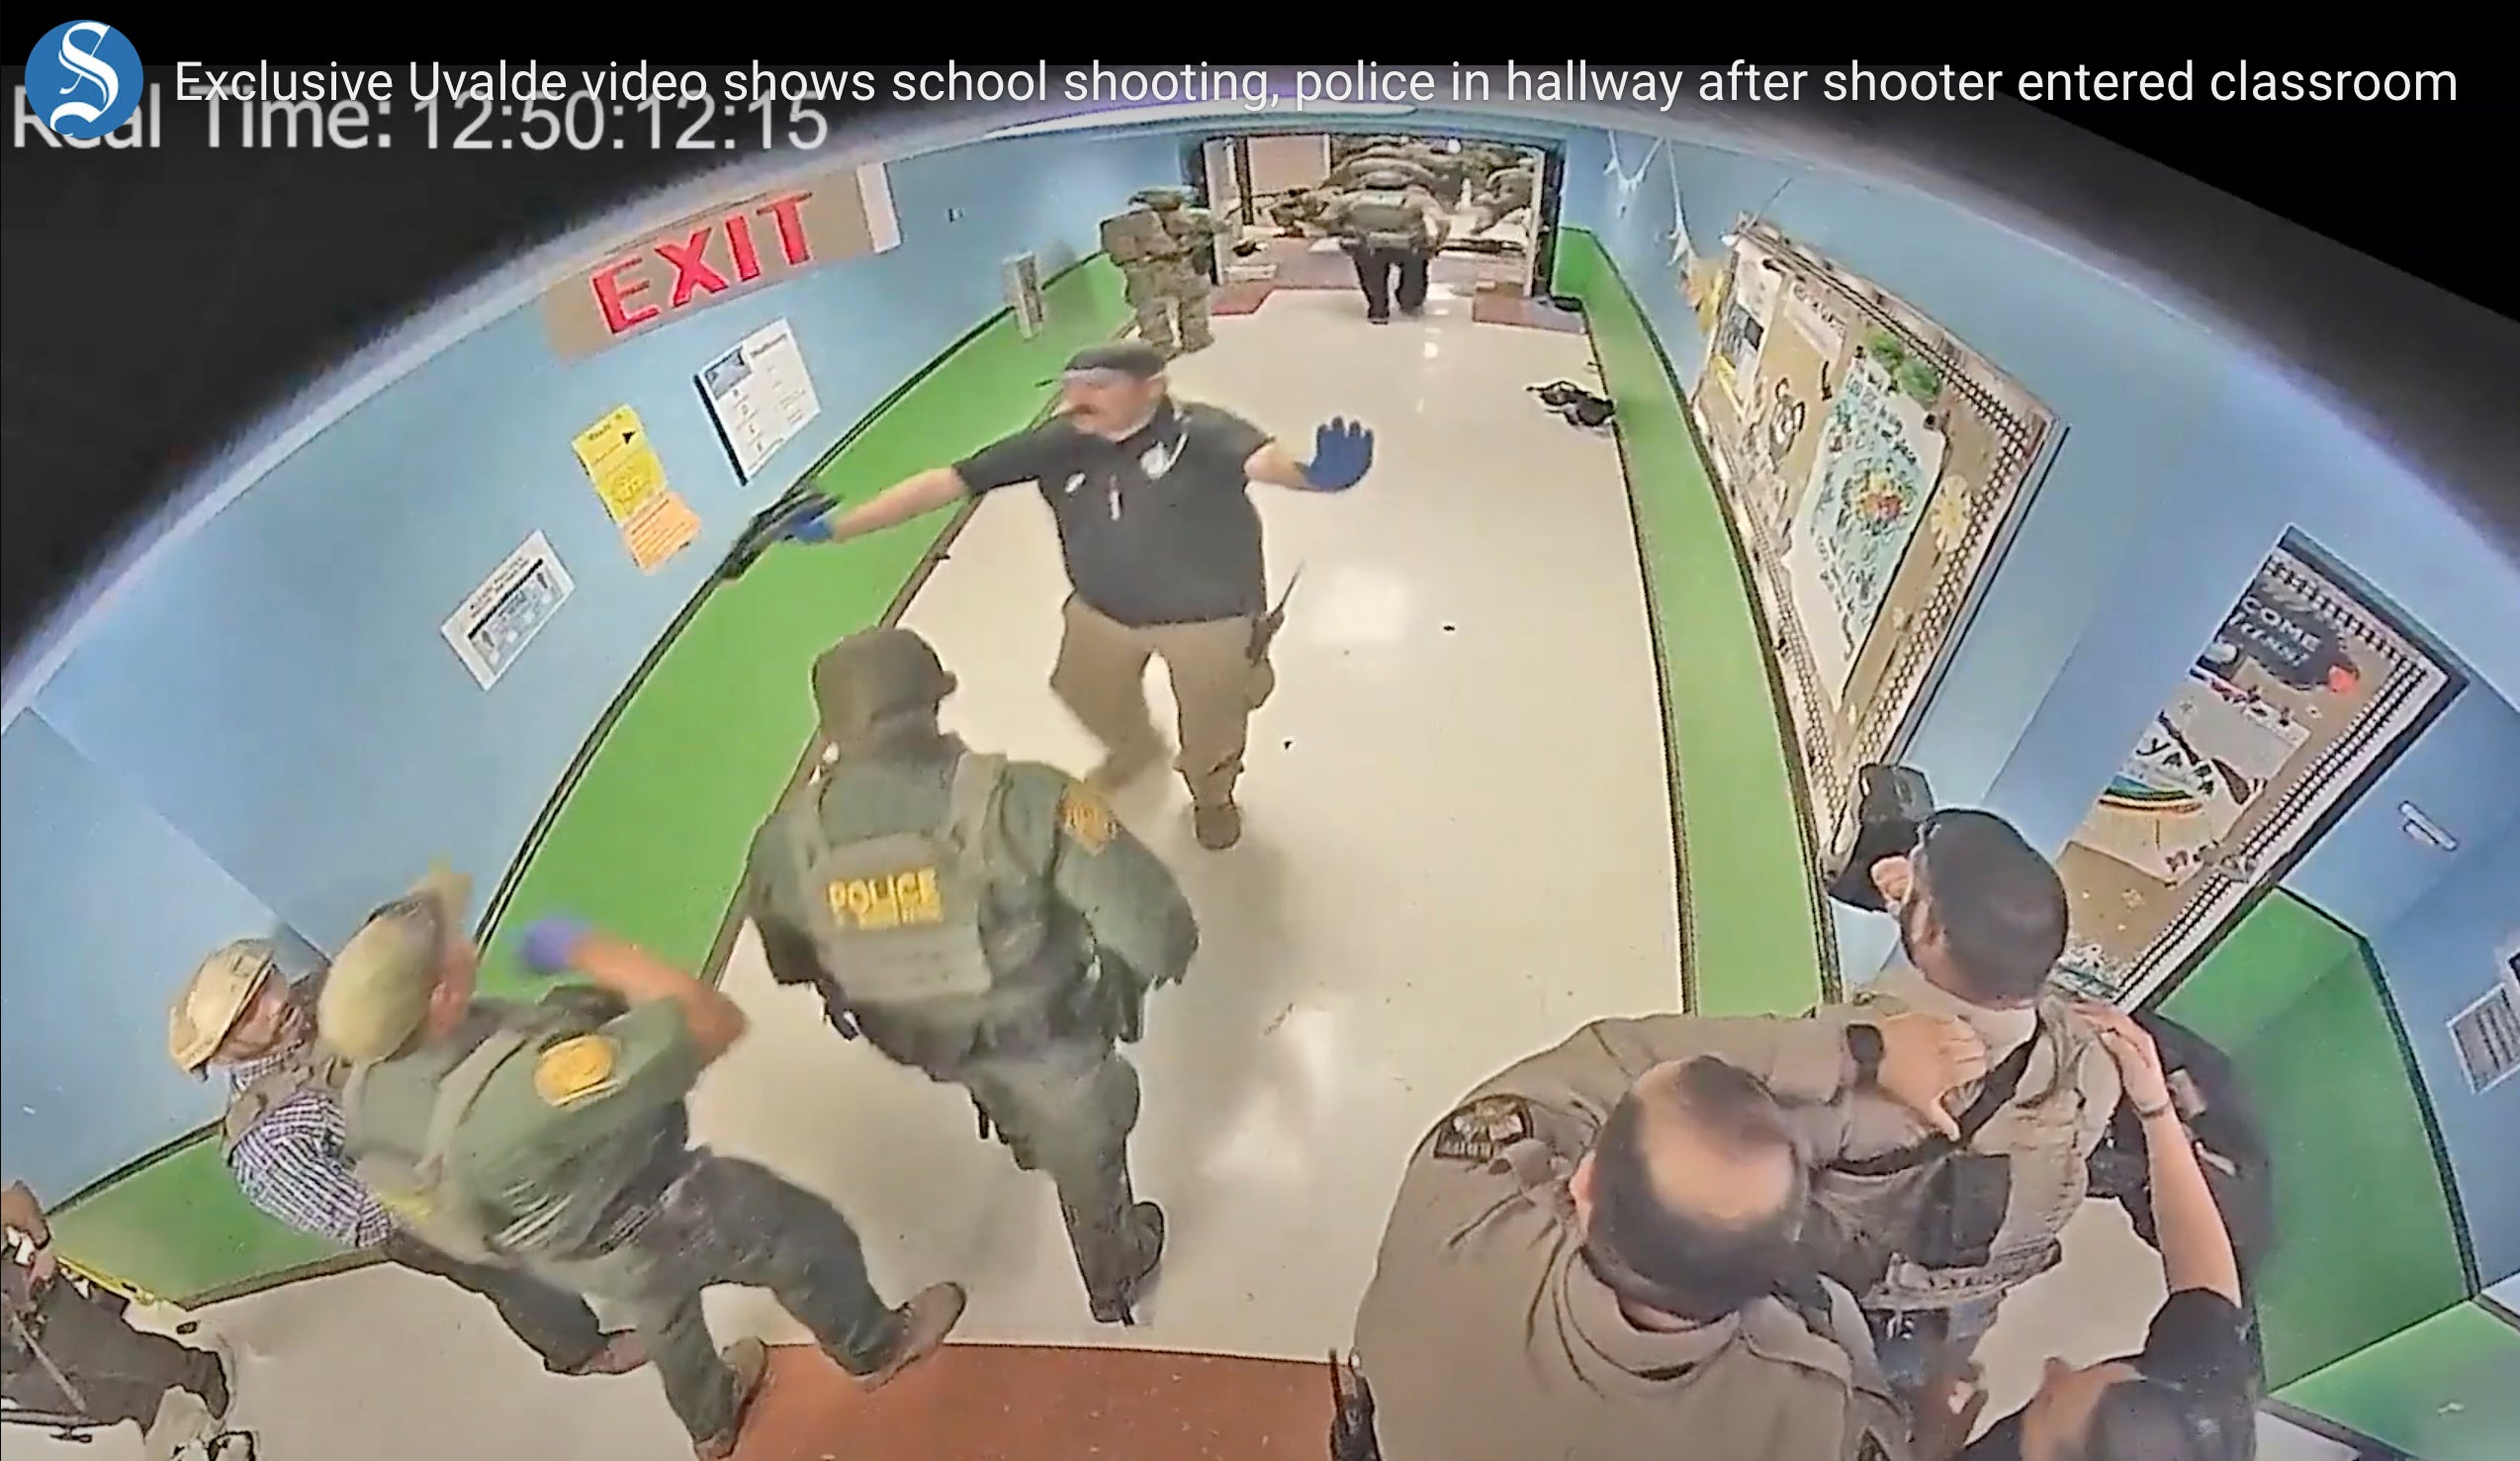 In this photo from surveillance video provided by the Uvalde Consolidated Independent School District via the Austin American-Statesman, authorities respond to the shooting at Robb Elementary School in Uvalde, Texas, on 24 May 2022